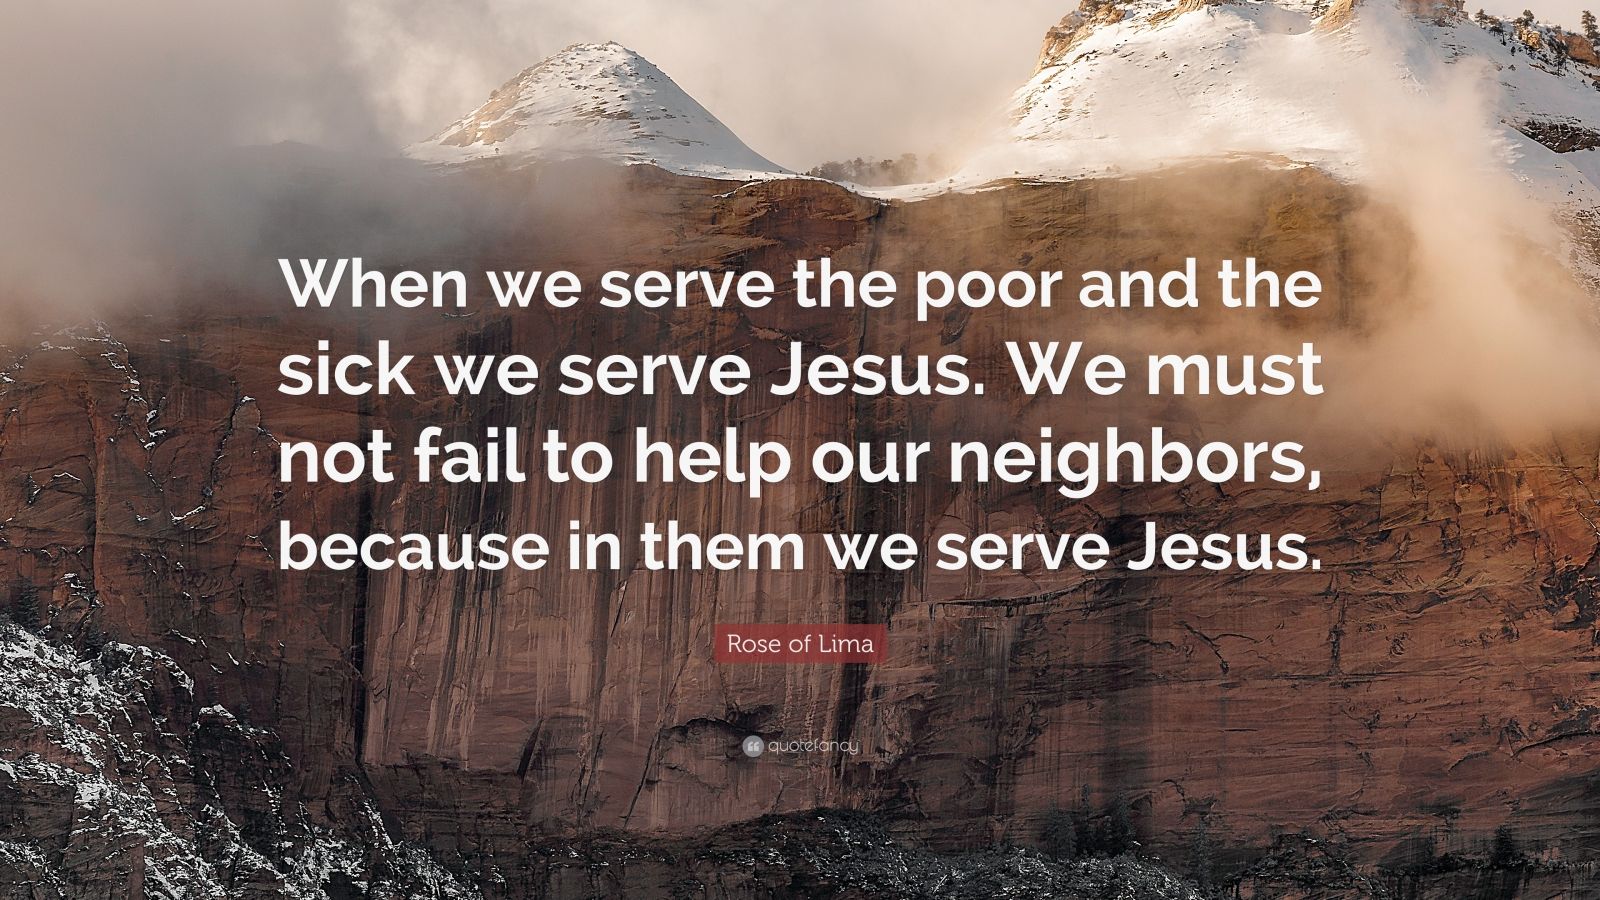 Rose of Lima Quote “When we serve the poor and the sick